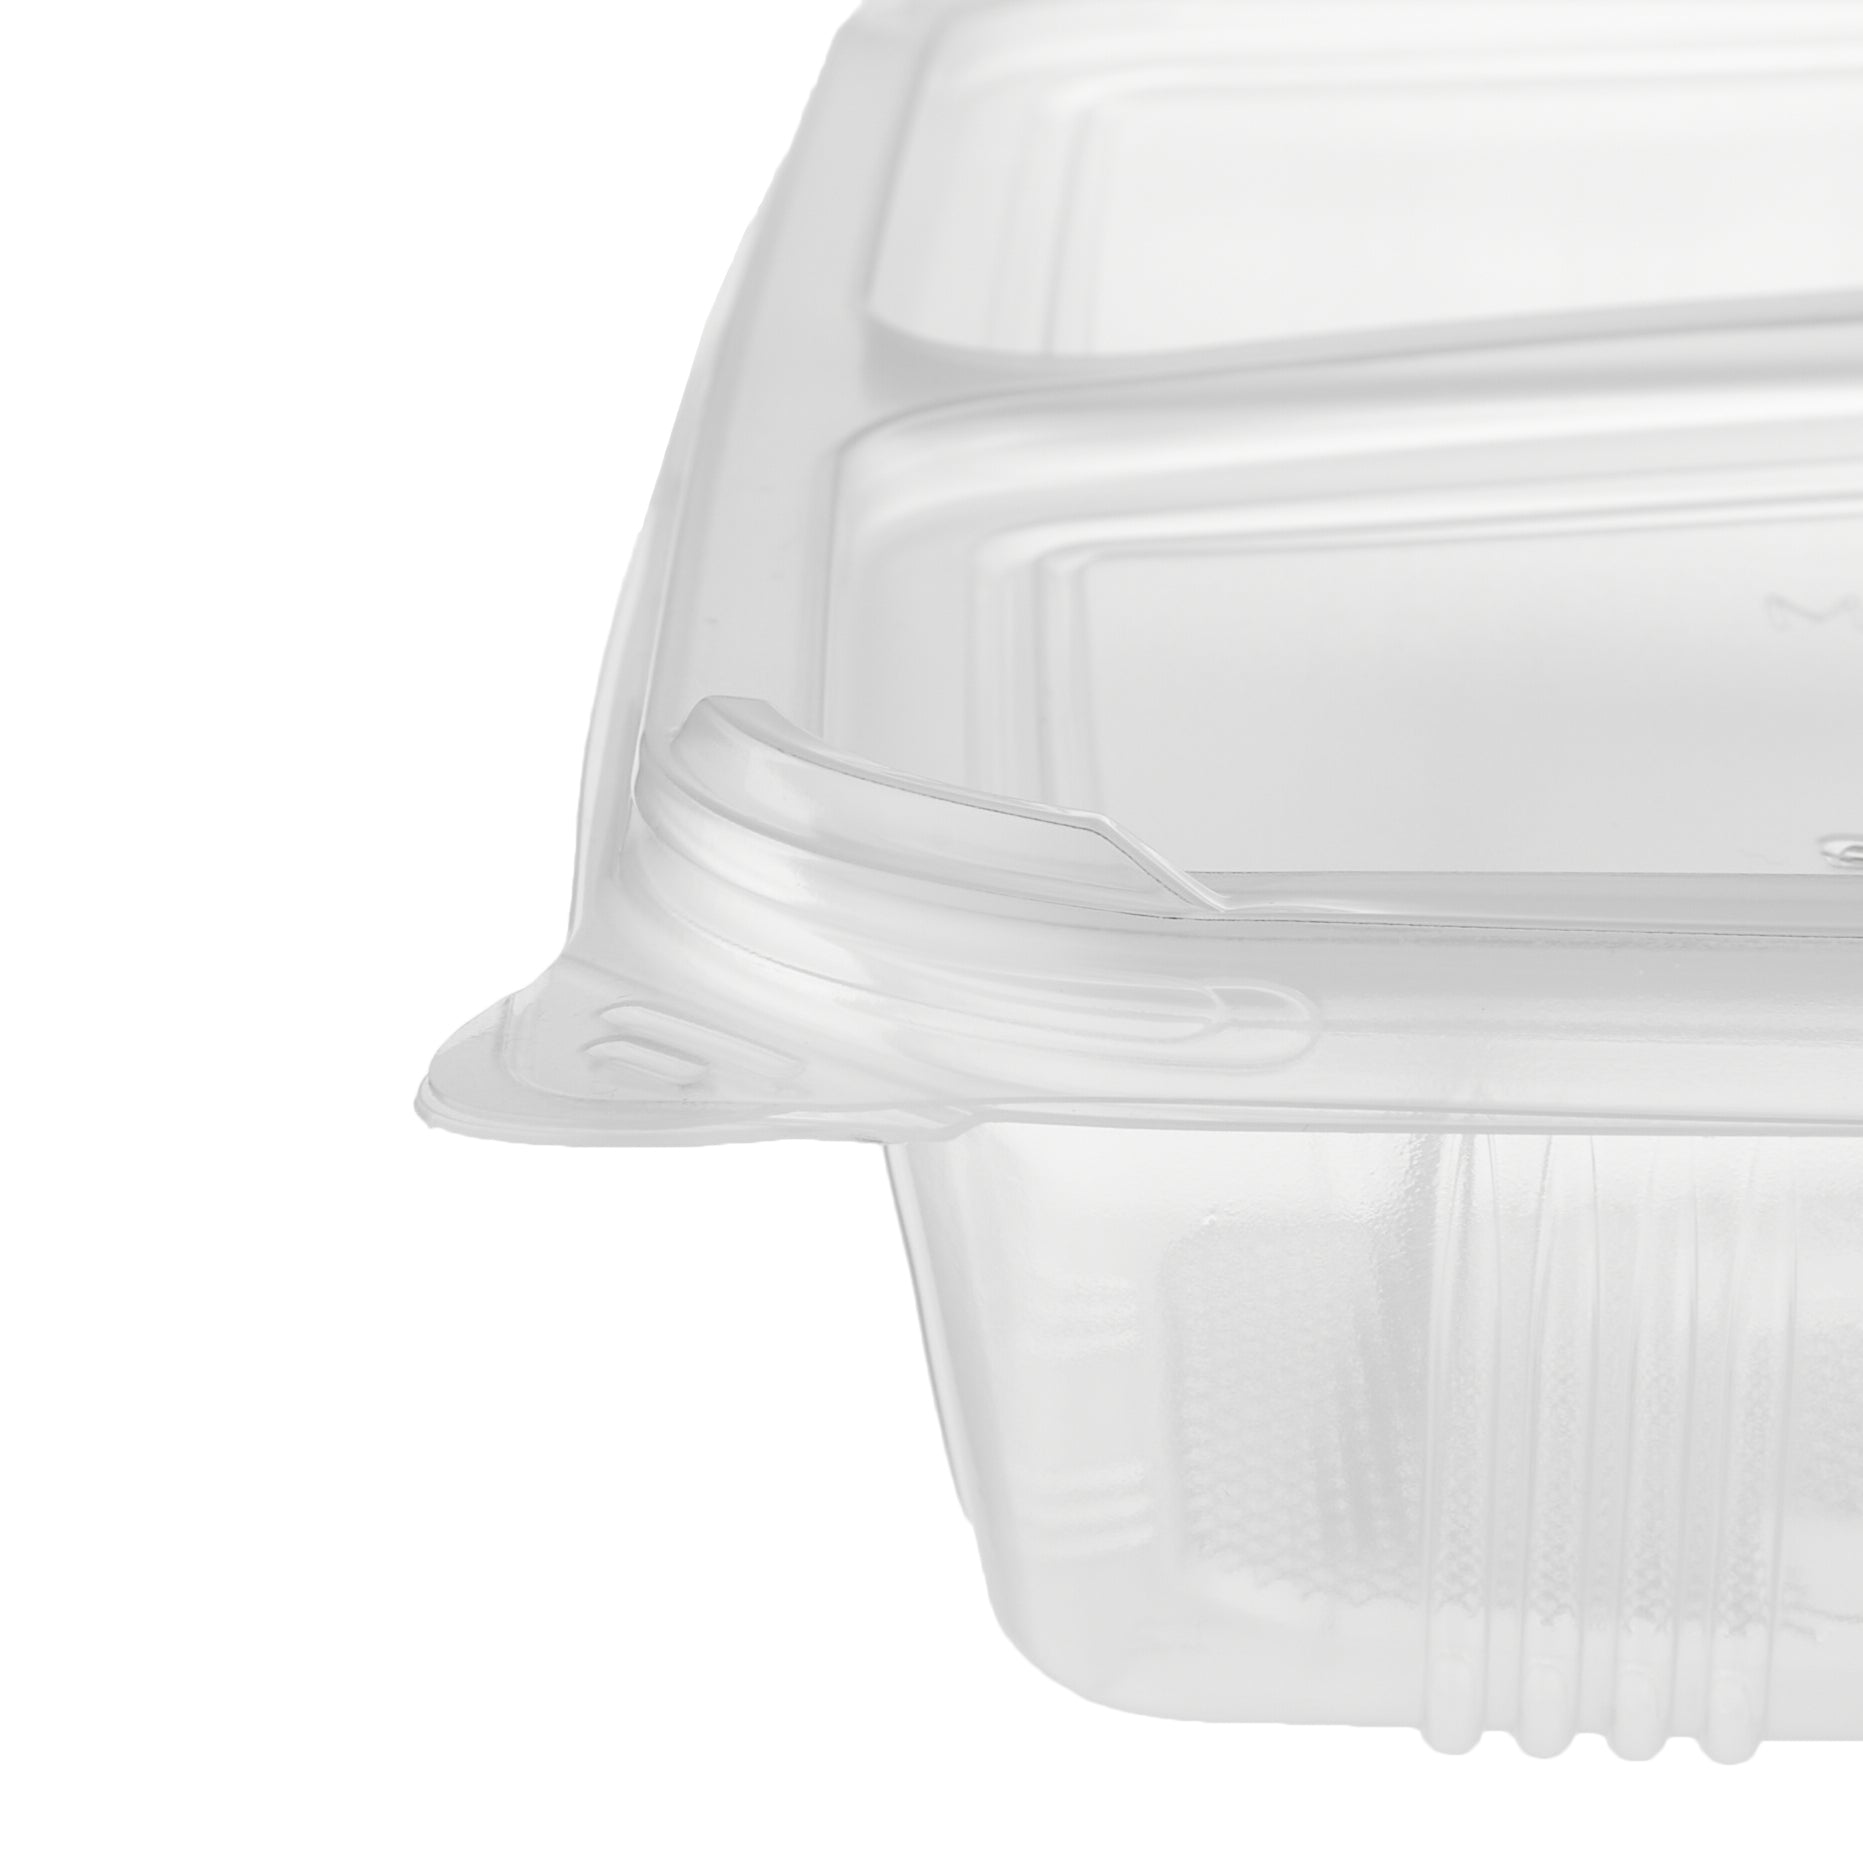 Microwave 3 Compartment Container With Lid - Hotpack Global